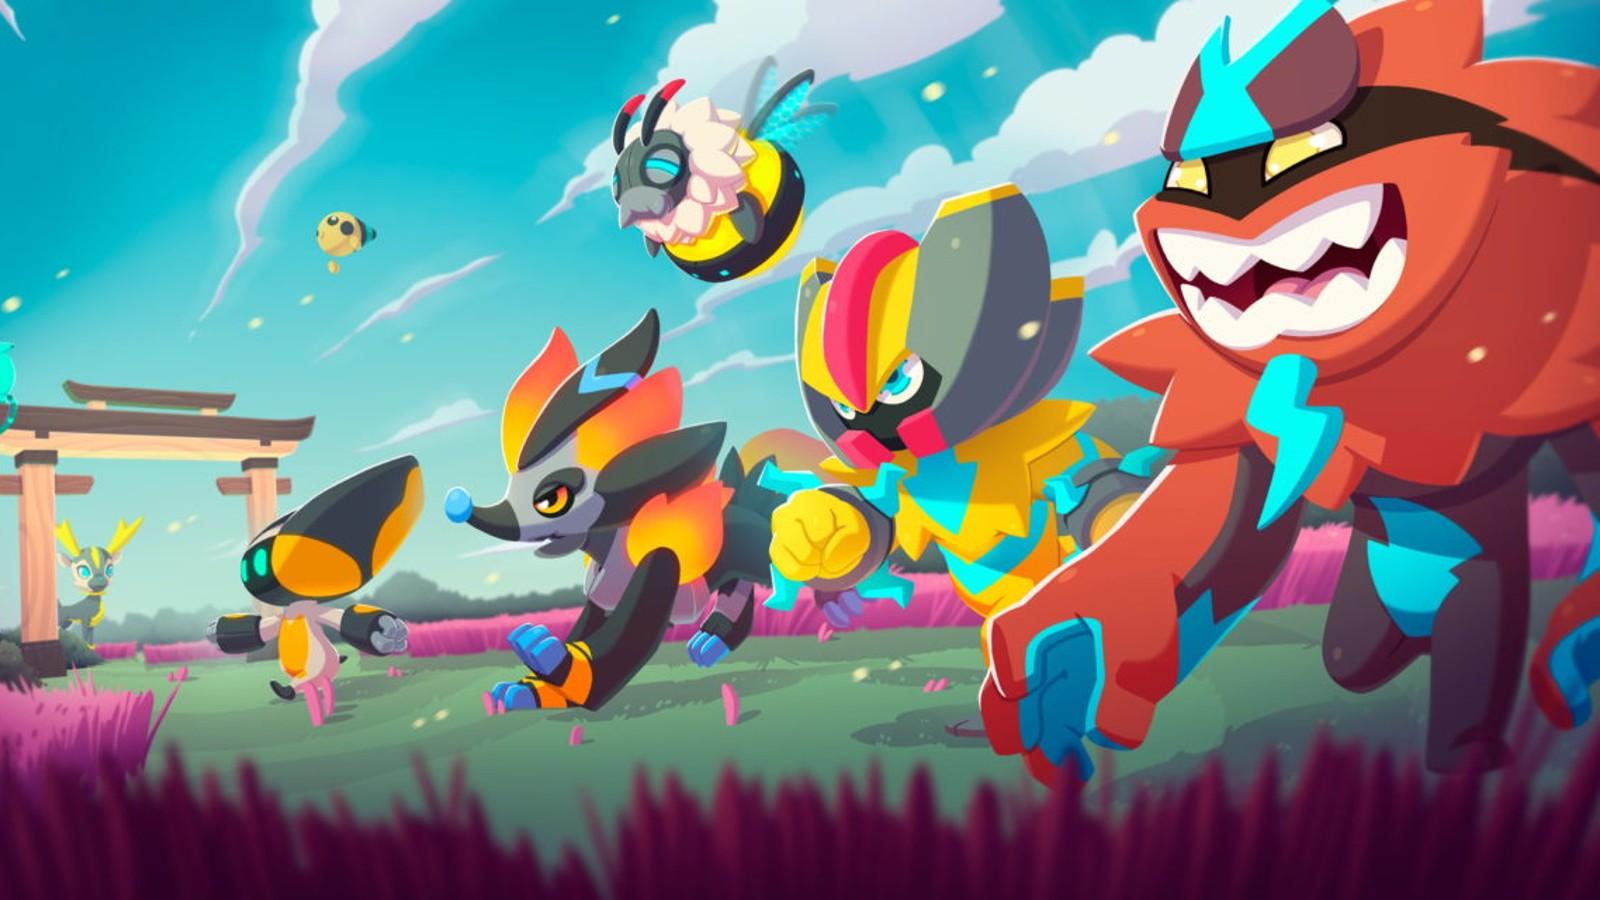 An image of Temtem creatures that players can use in the endgame content.